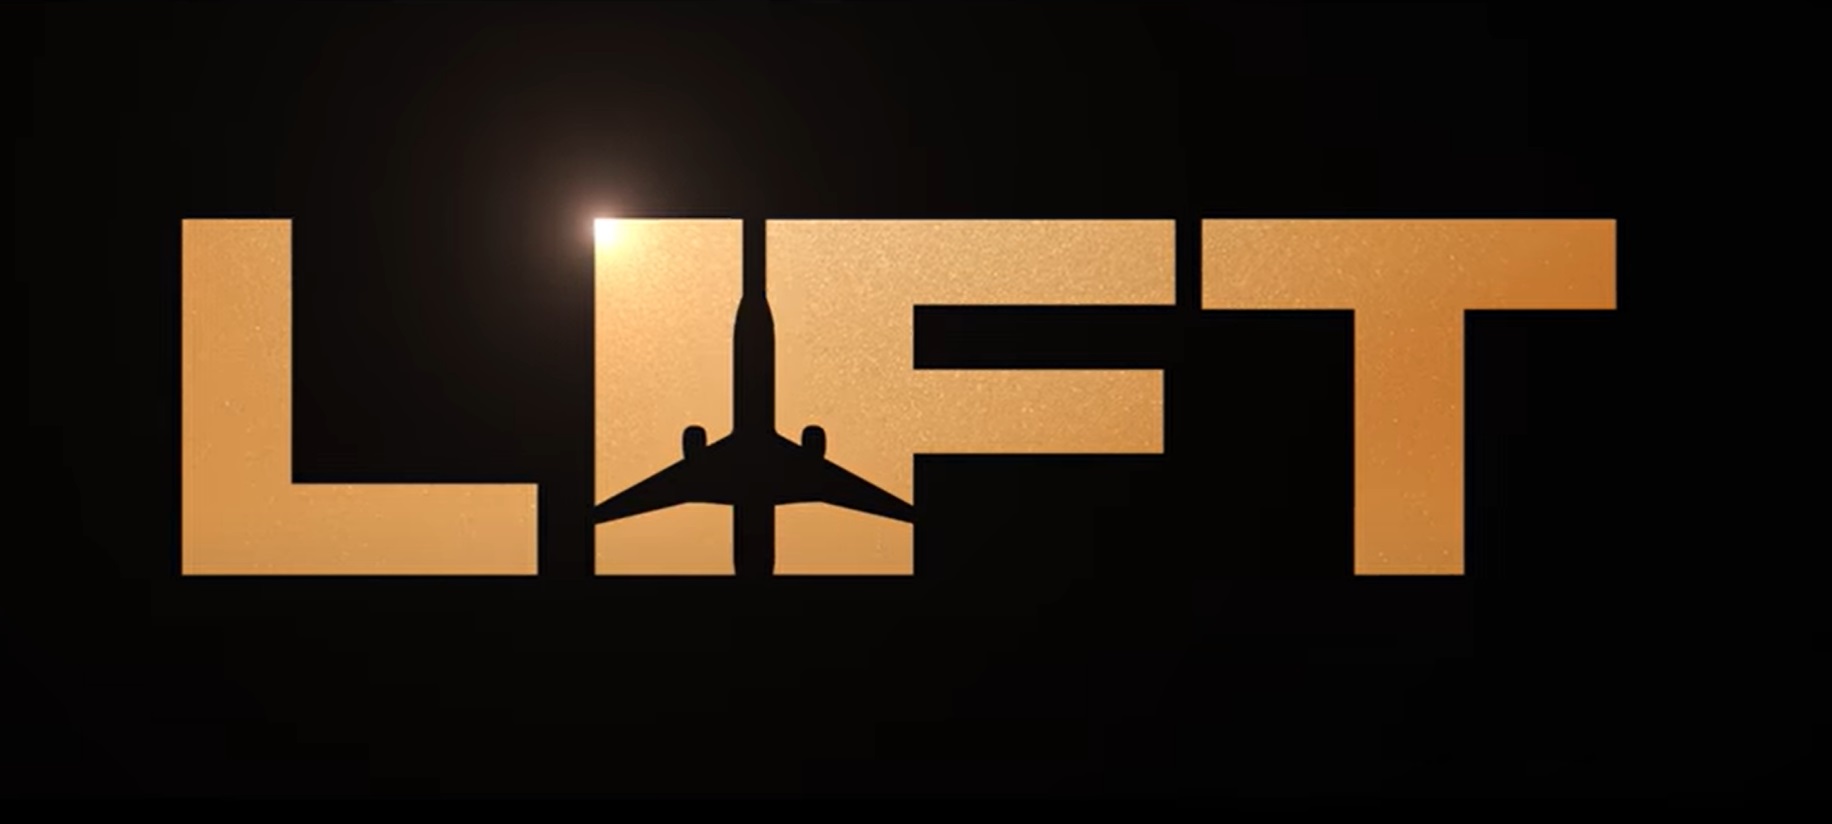 You are currently viewing Lift | Trailer